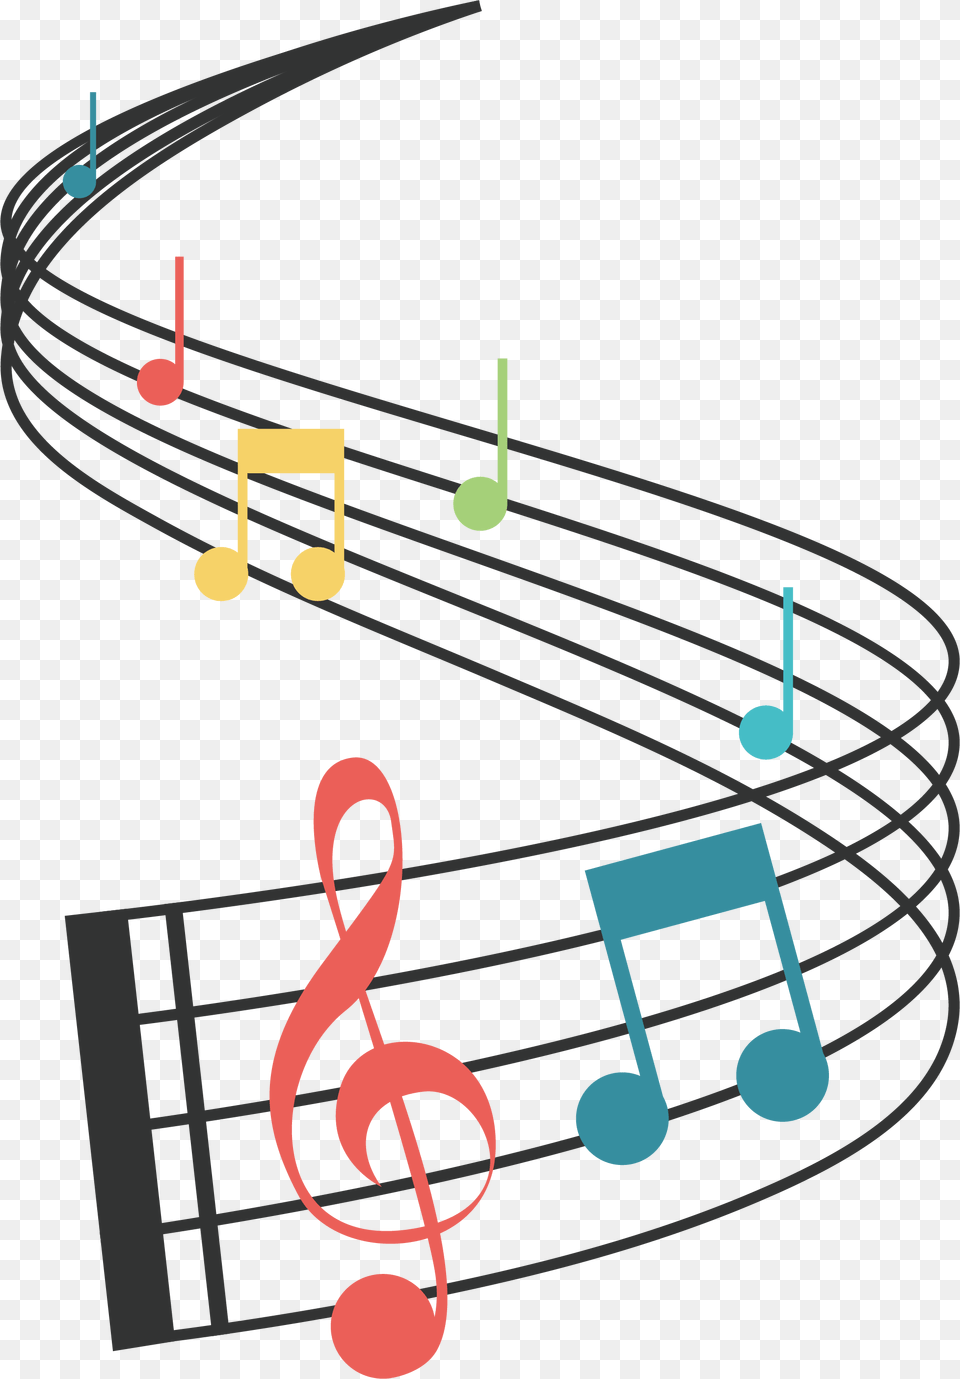 Musician Clipart Music Staff Notes Musical Staff, Road, Freeway, Device, Grass Png Image